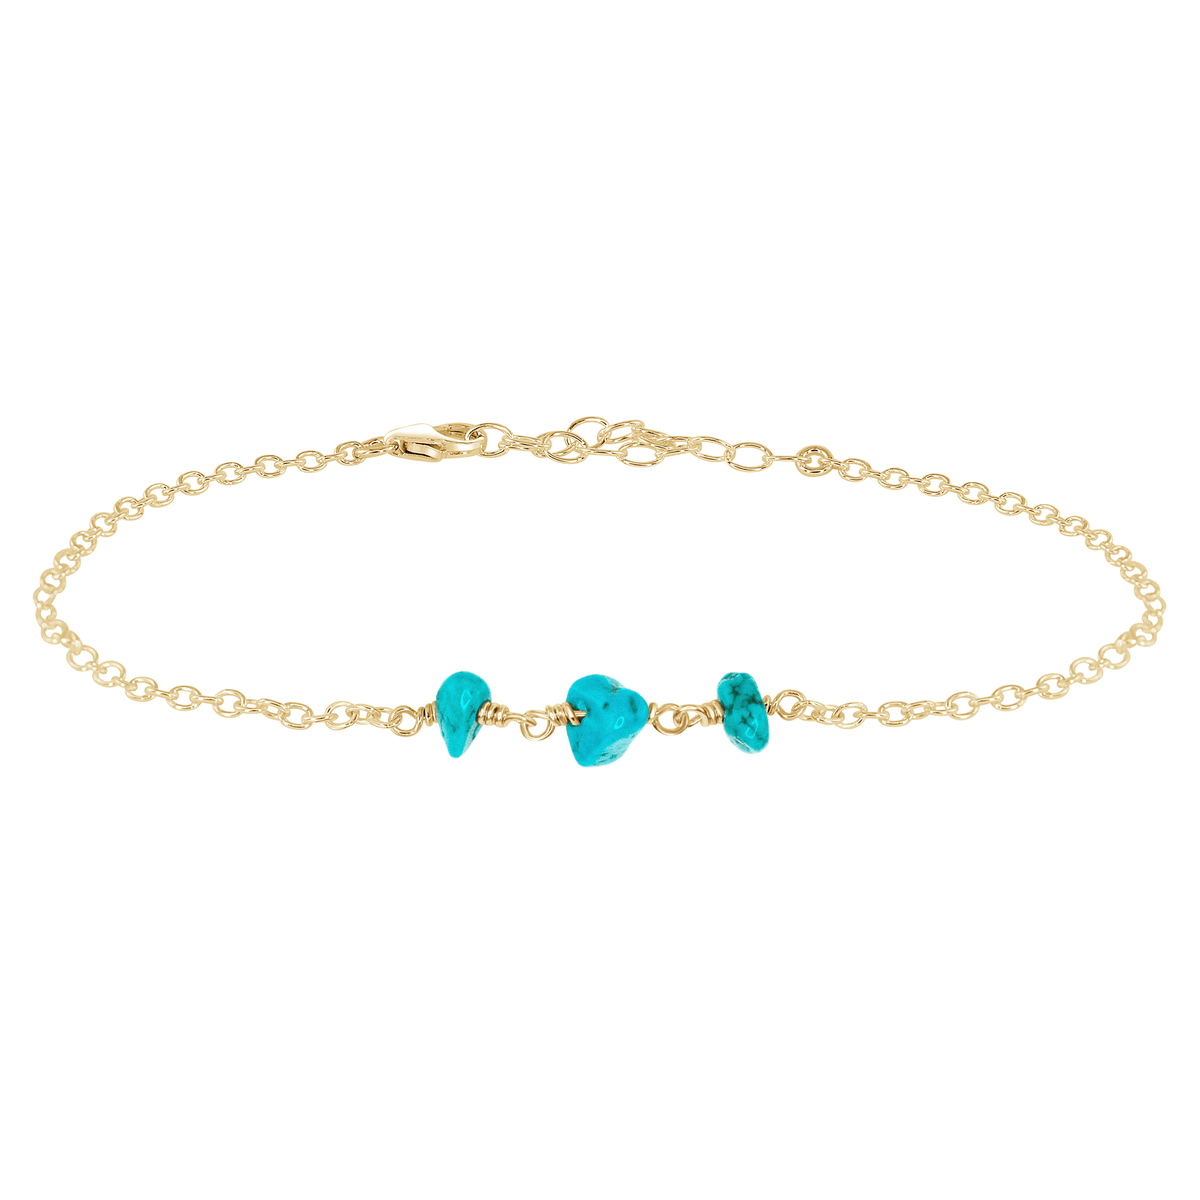 Beaded Chain Anklet - Turquoise - 14K Gold Fill - Luna Tide Handmade Jewellery